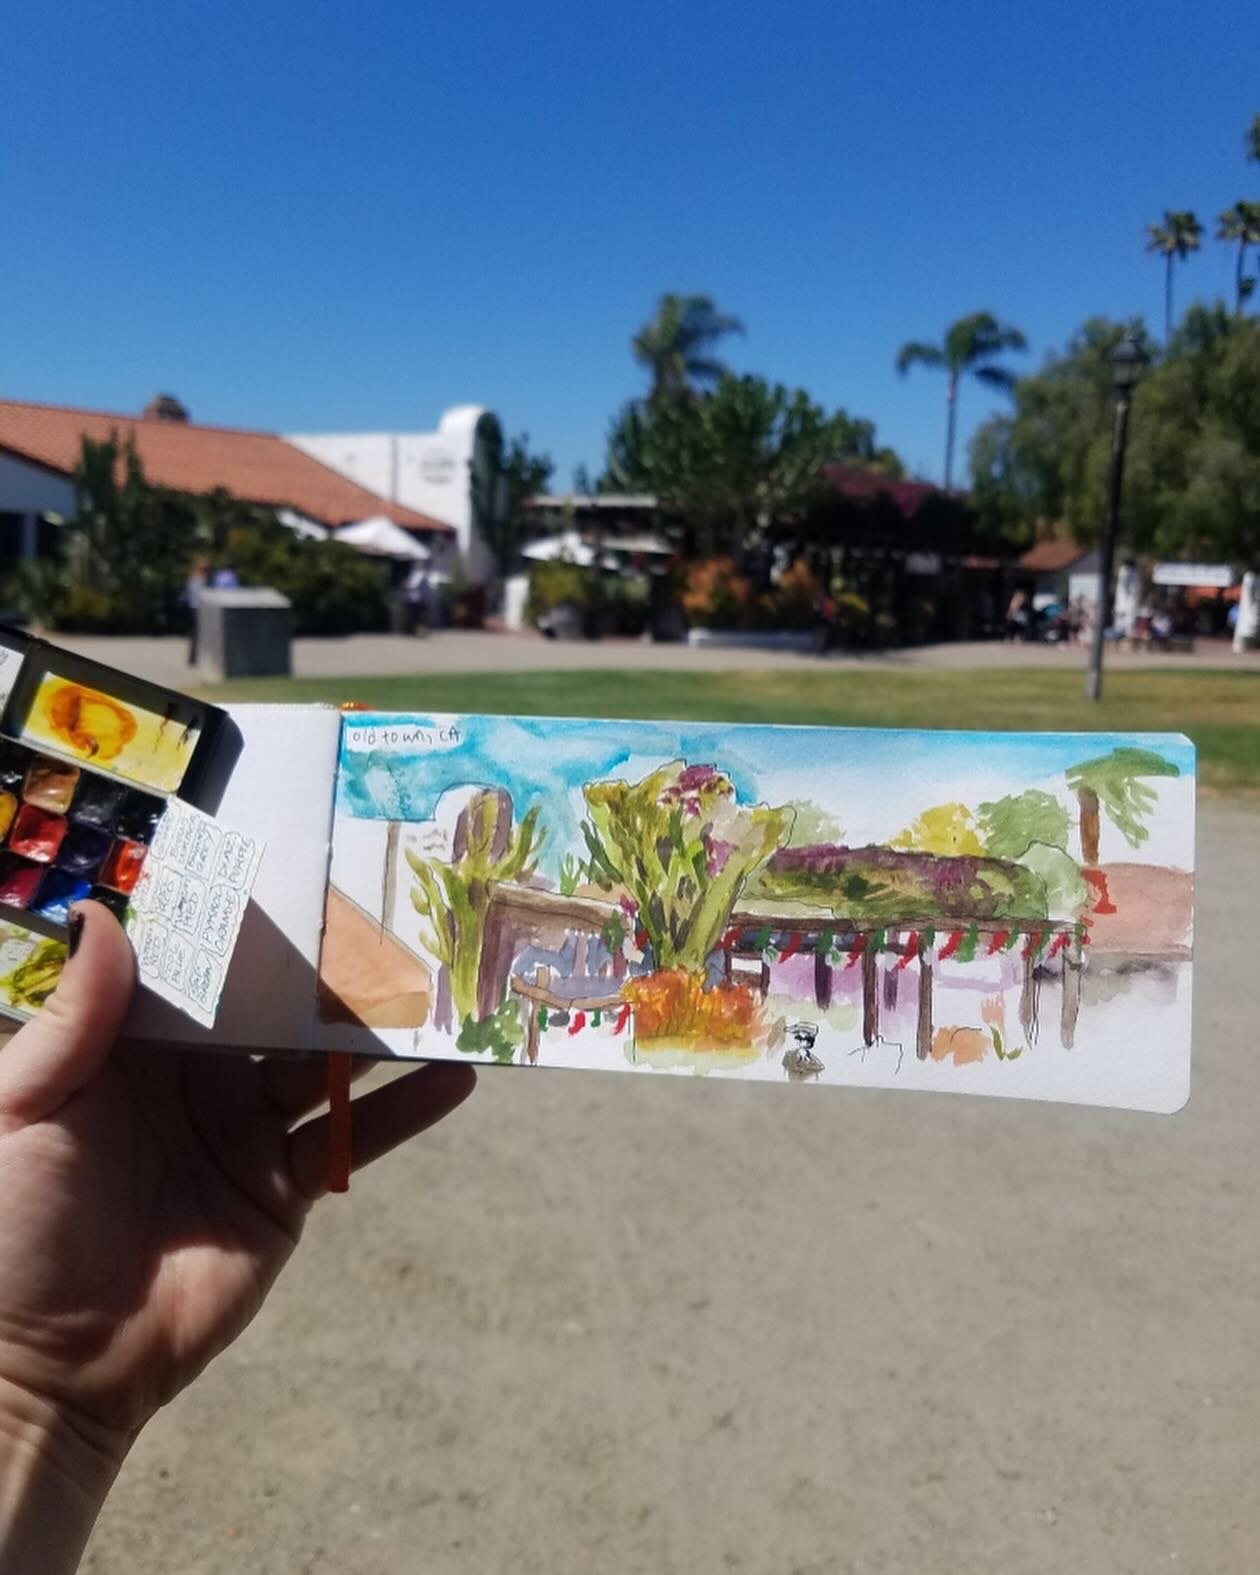 Vincent is out and about with our On the Spot kit! This sketching kit features the Explore Palette from @arttoolkit! Those watercolors look so vibrant in that sunshine ☀️ Can you guess where Vincent is visiting??

#travelwatercolor #urbansketchers #u